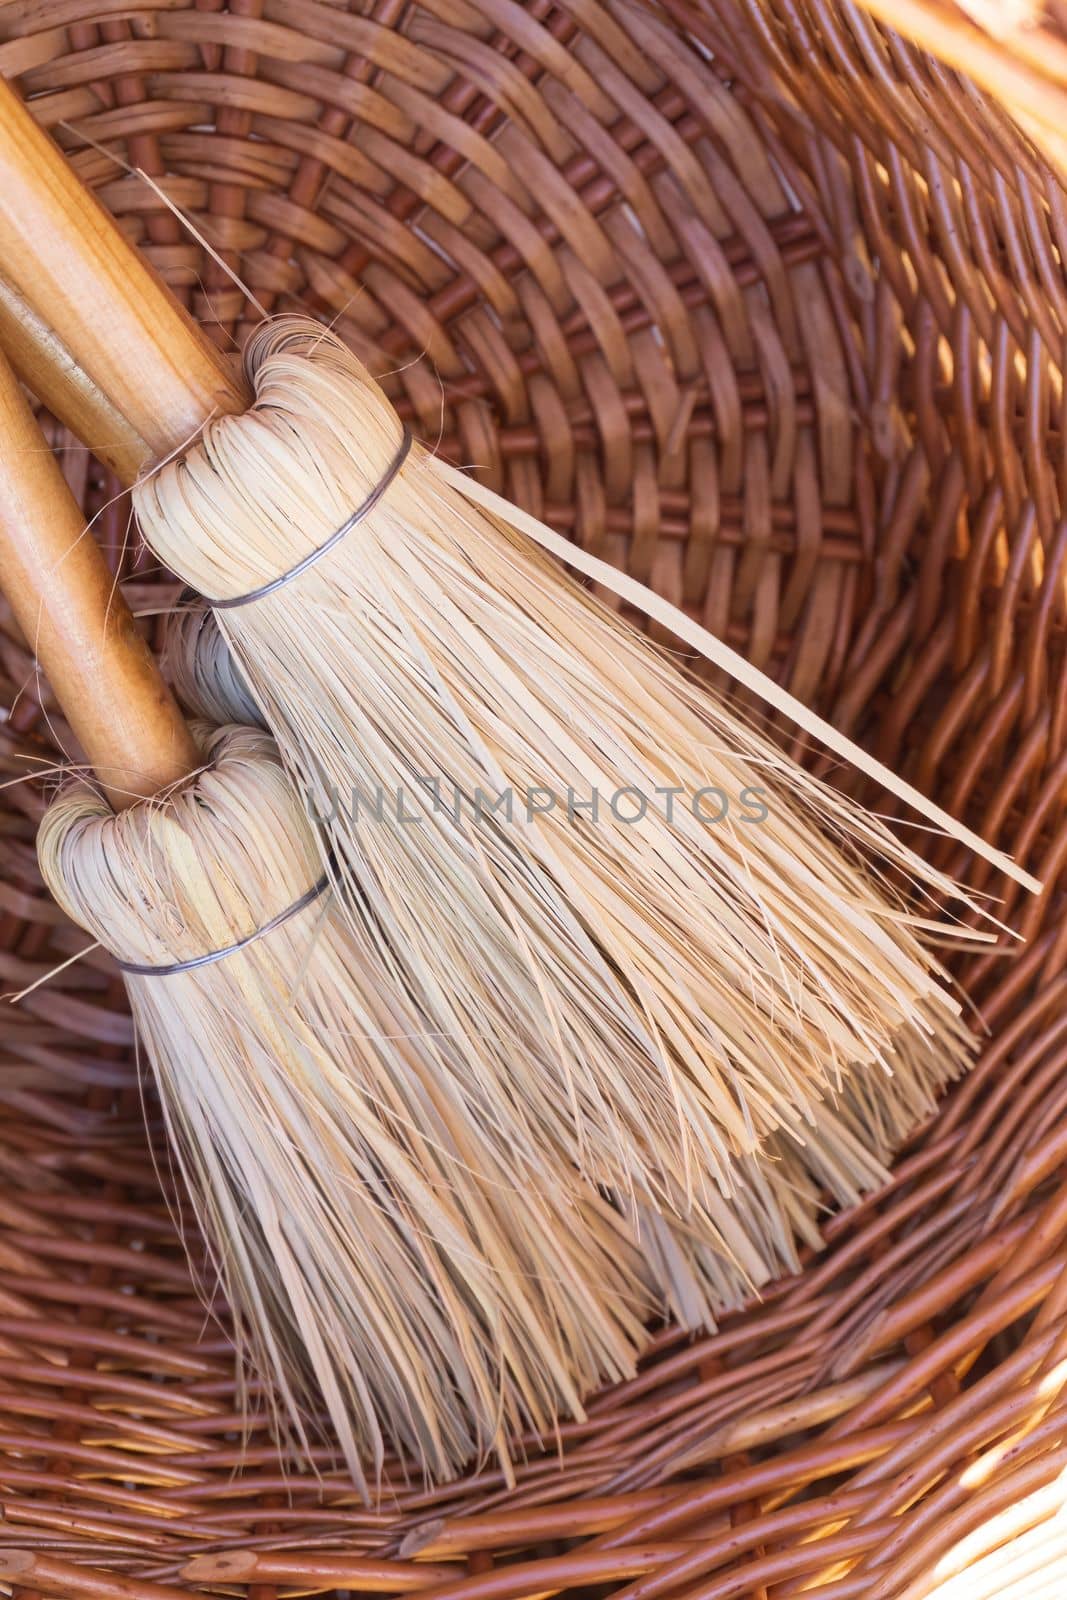 Small eco-friendly handmade brooms in a wicker basket close up by Challlenger